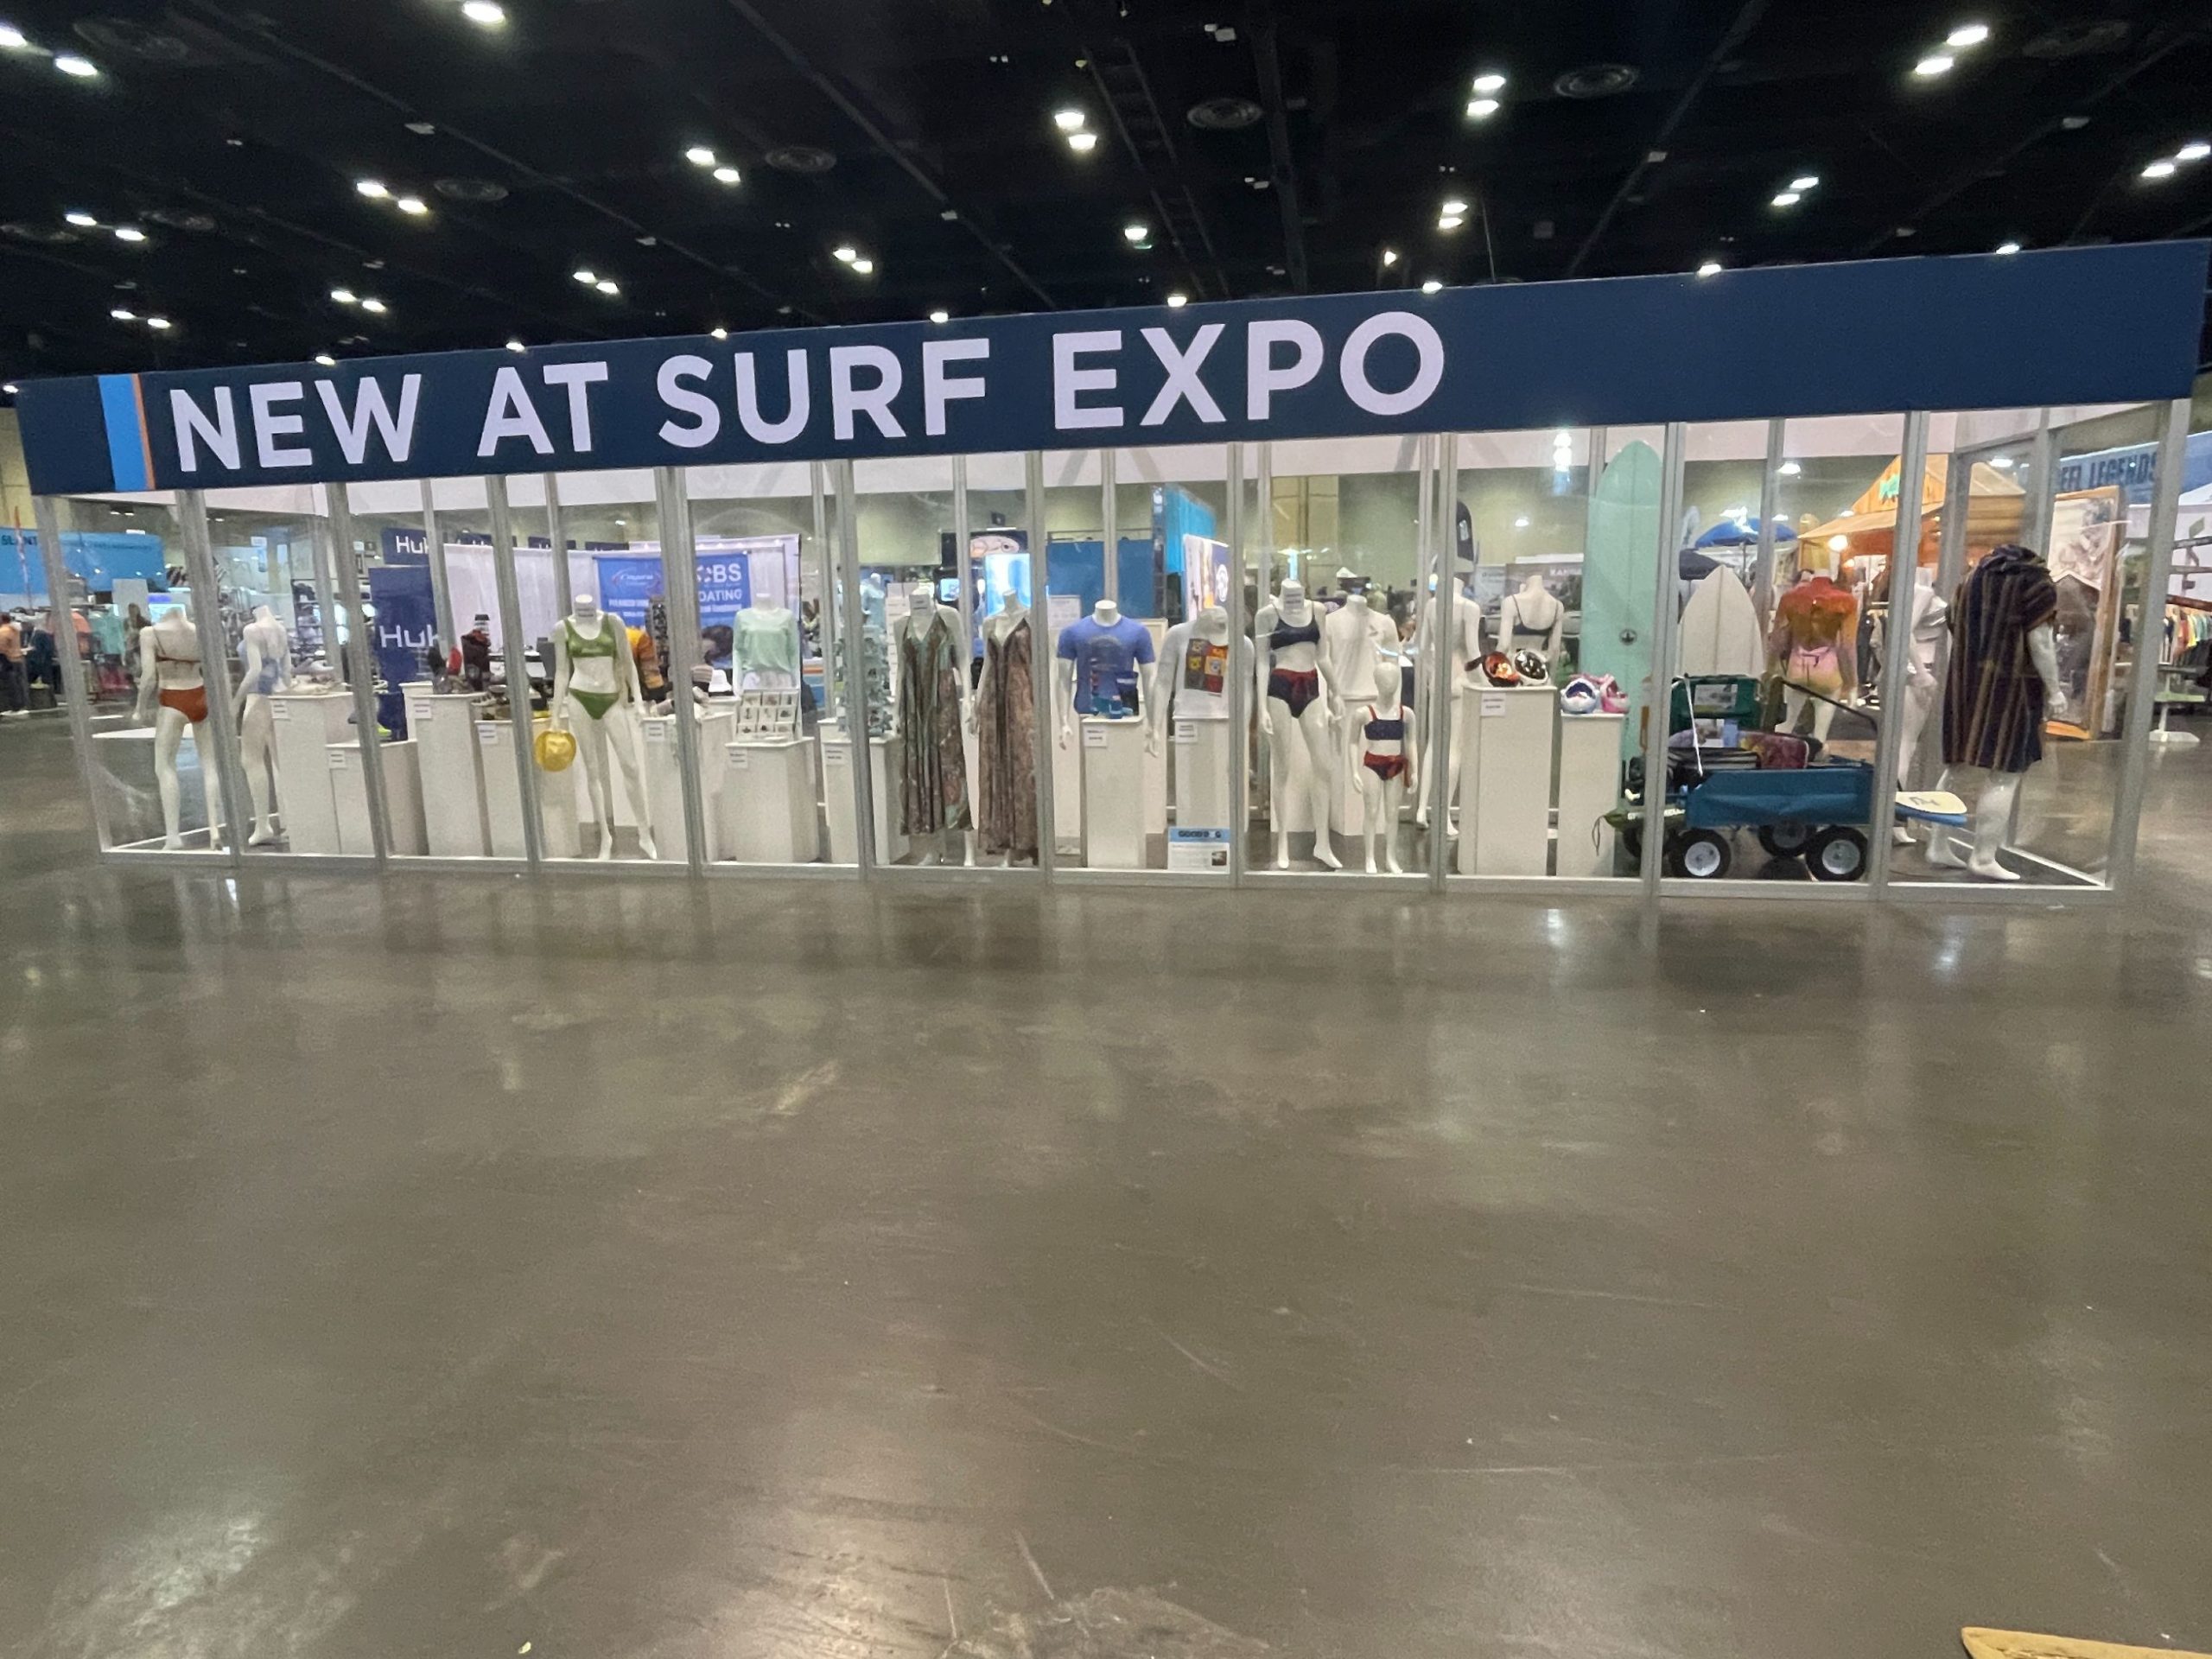 New to Surf Expo exhibition